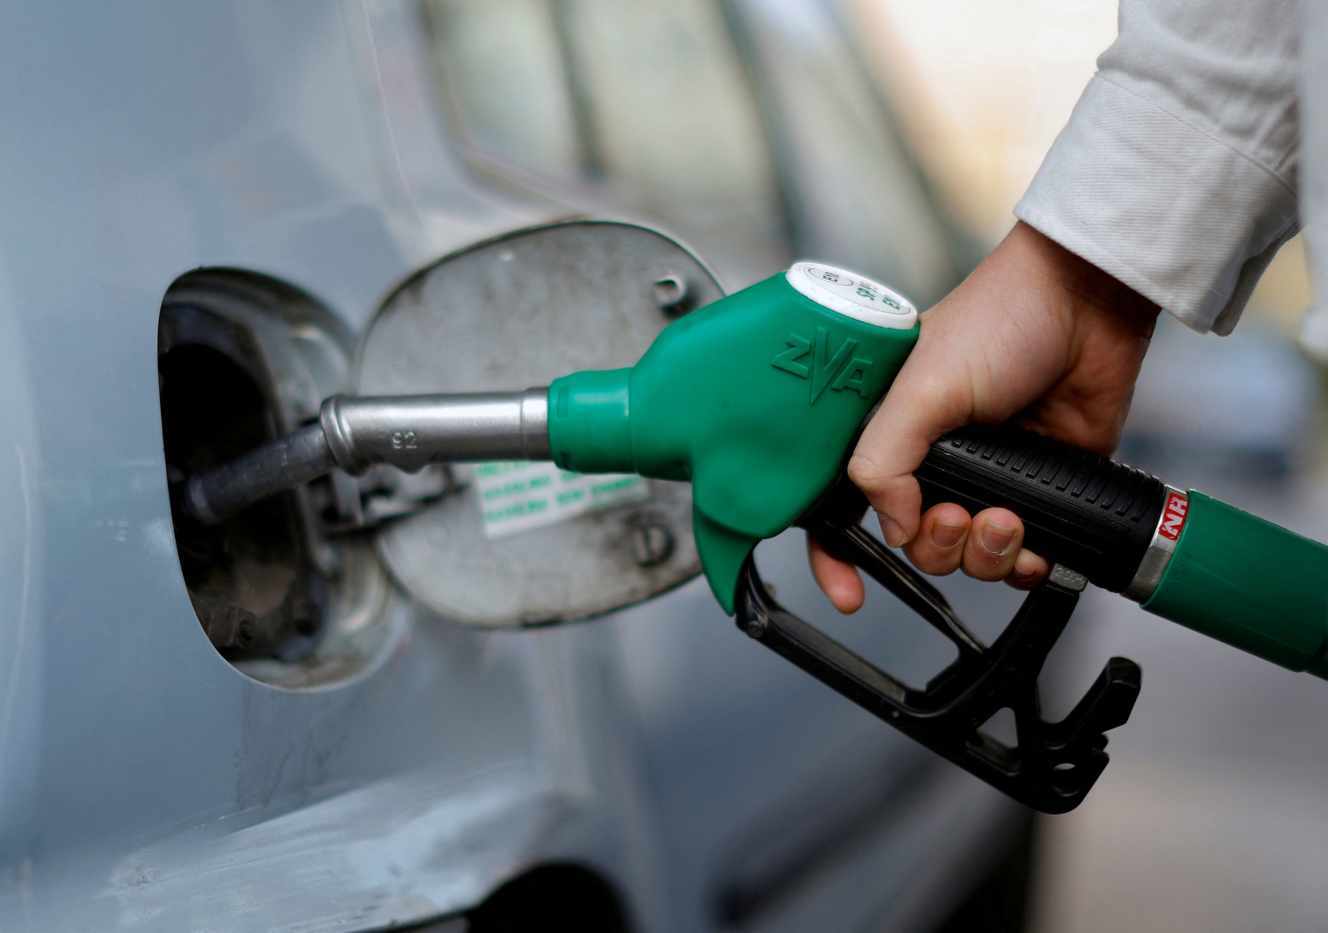 Many drivers mix gasoline for cars themselves to save money